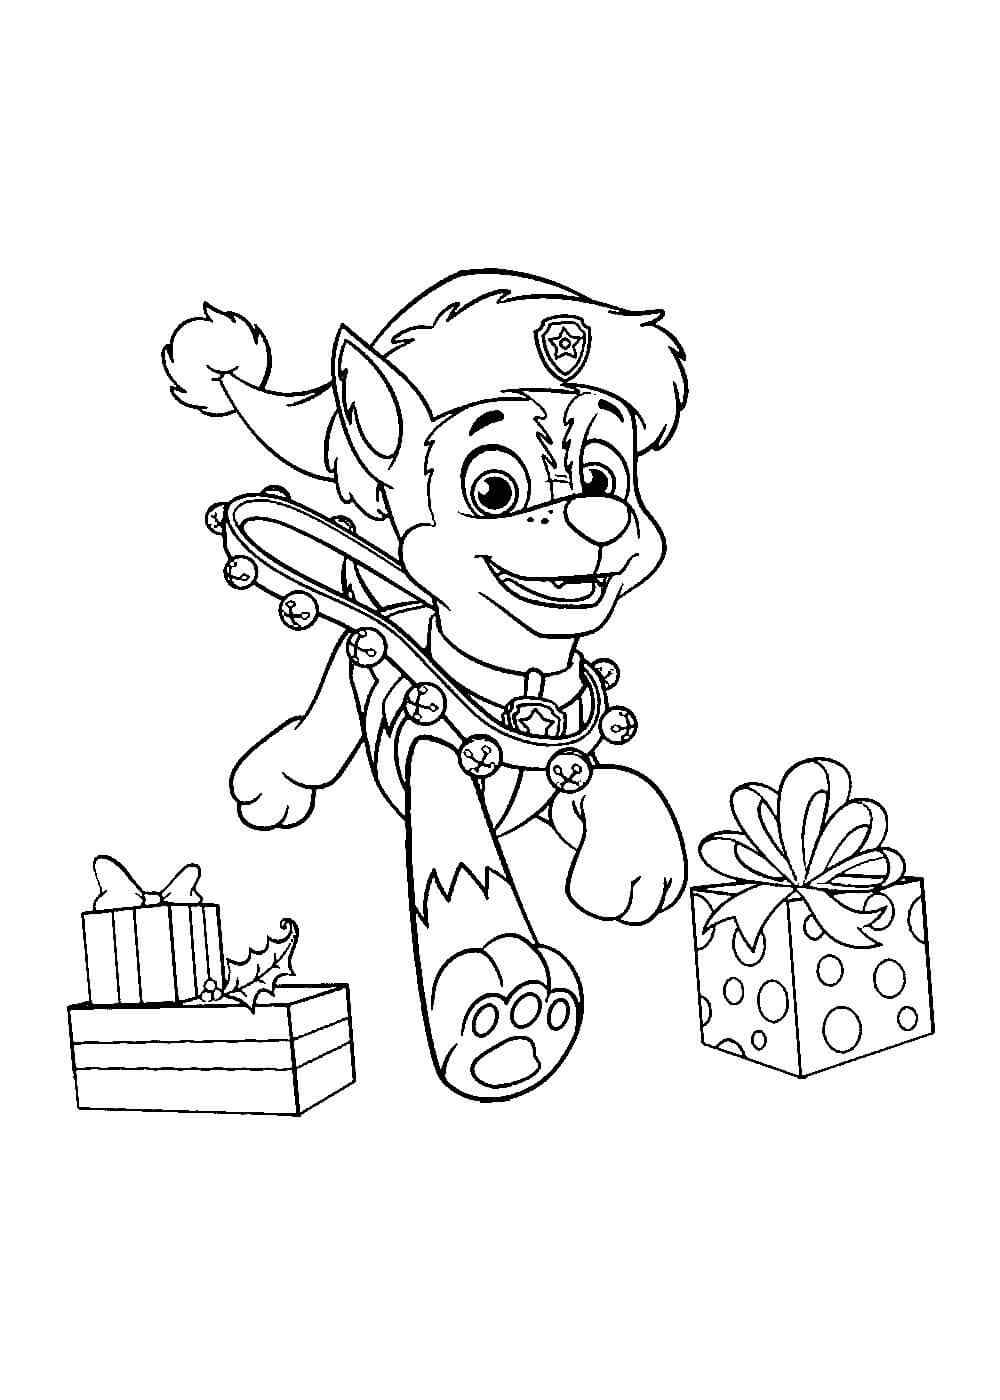 Wish Everyone A Happy New Year Coloring Page